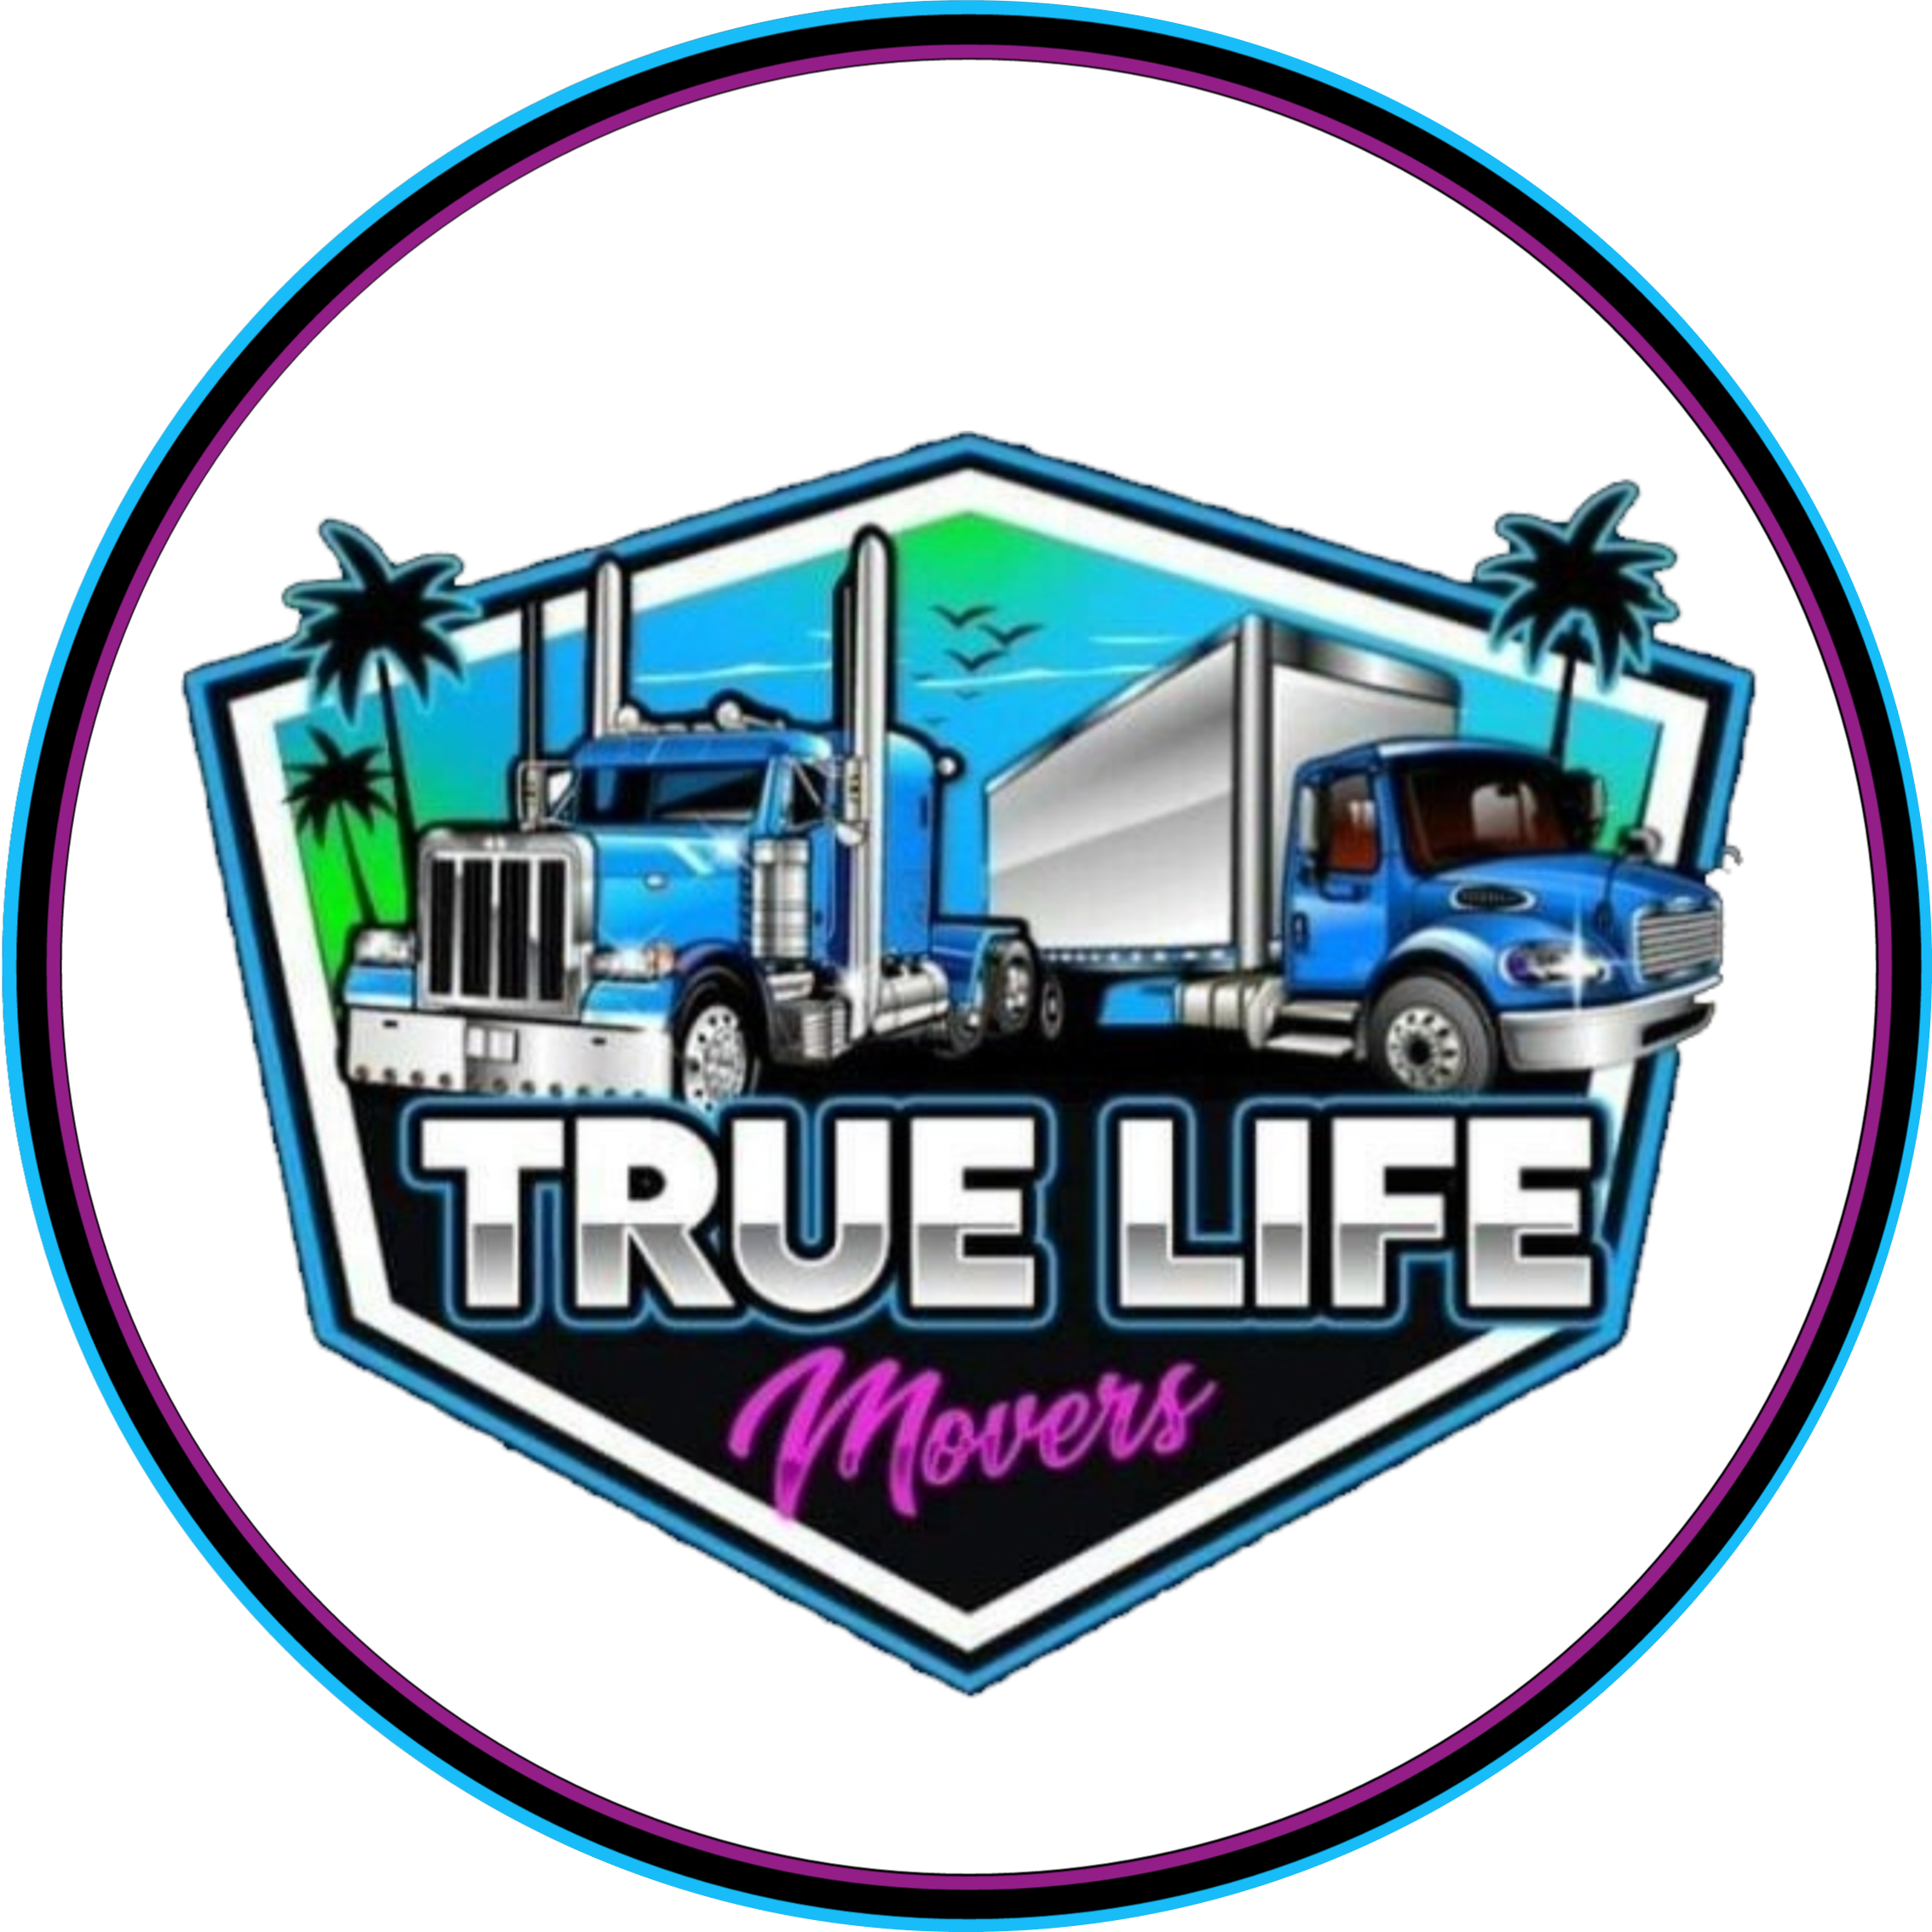 Moving company in Tampa Florida